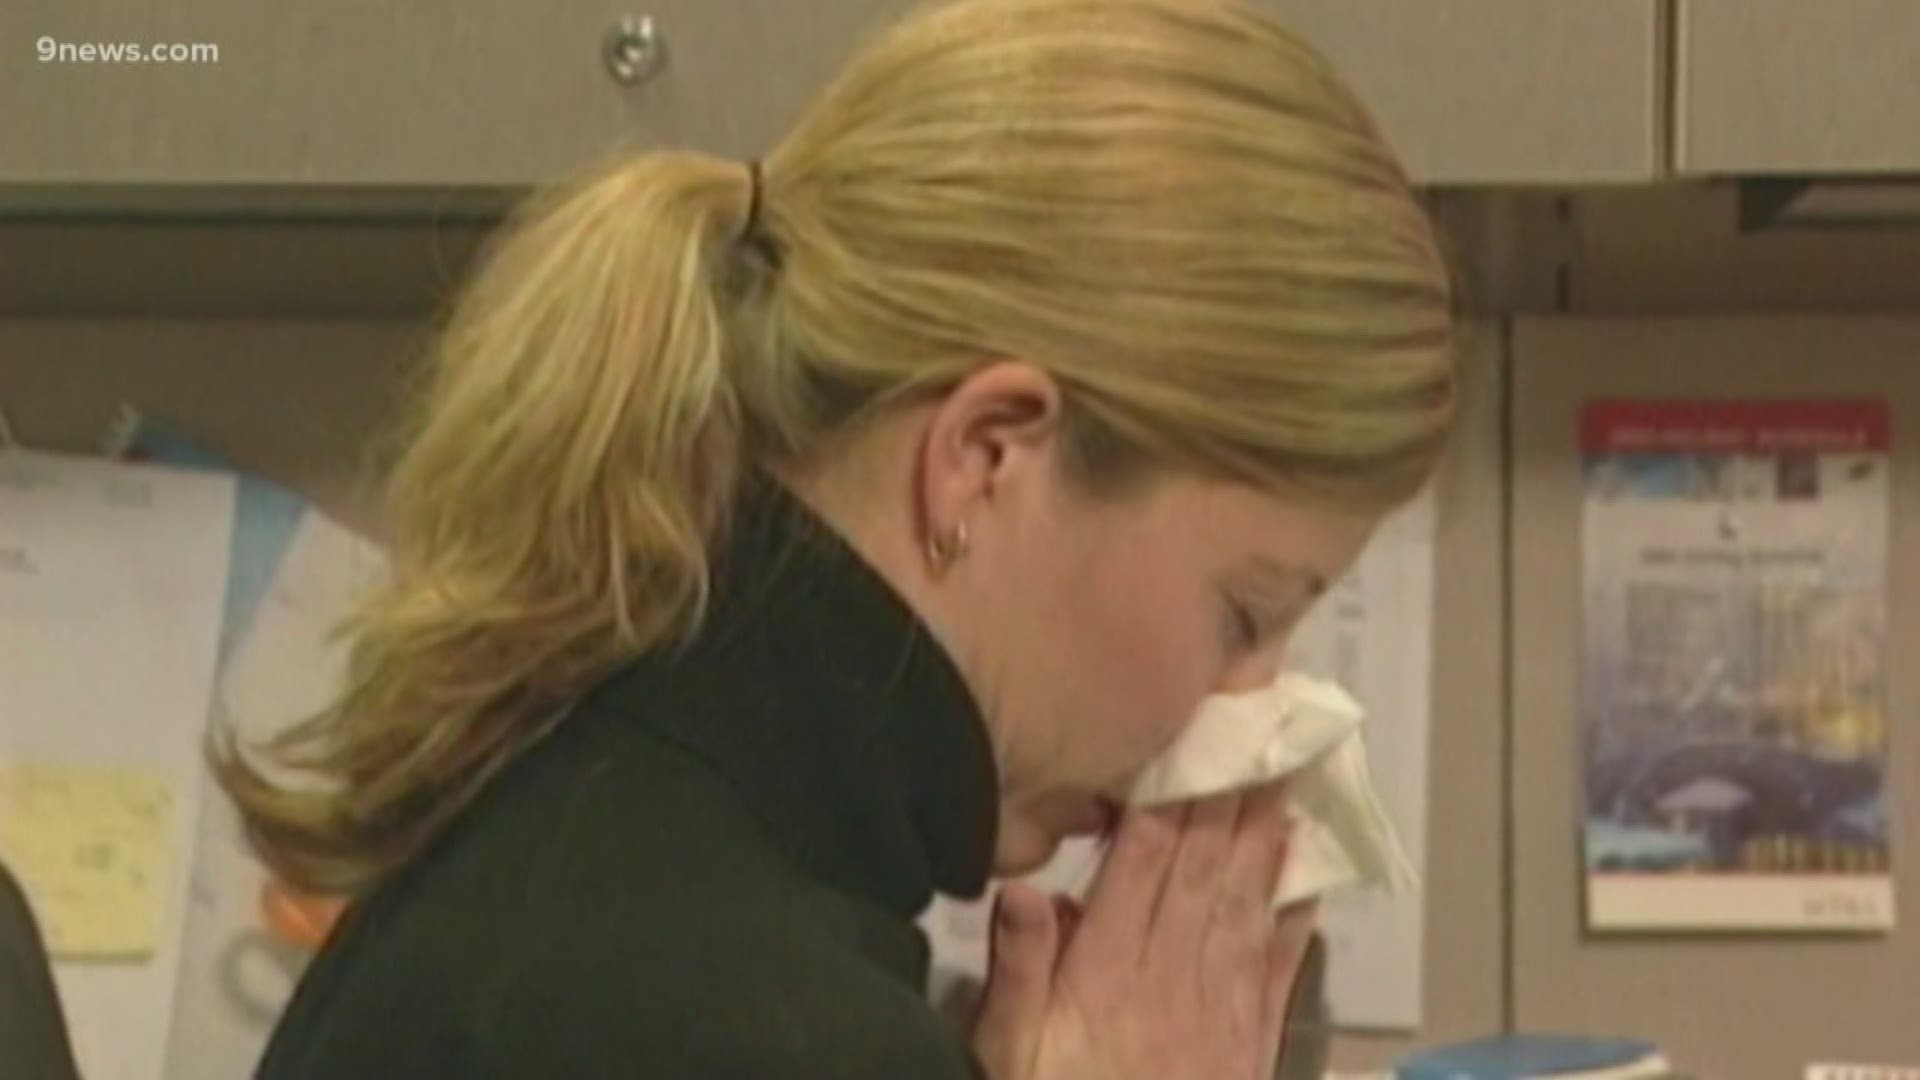 Is it the flu or a cold? We spoke with a nurse to learn how to tell the difference and got other tips to keep you healthy.